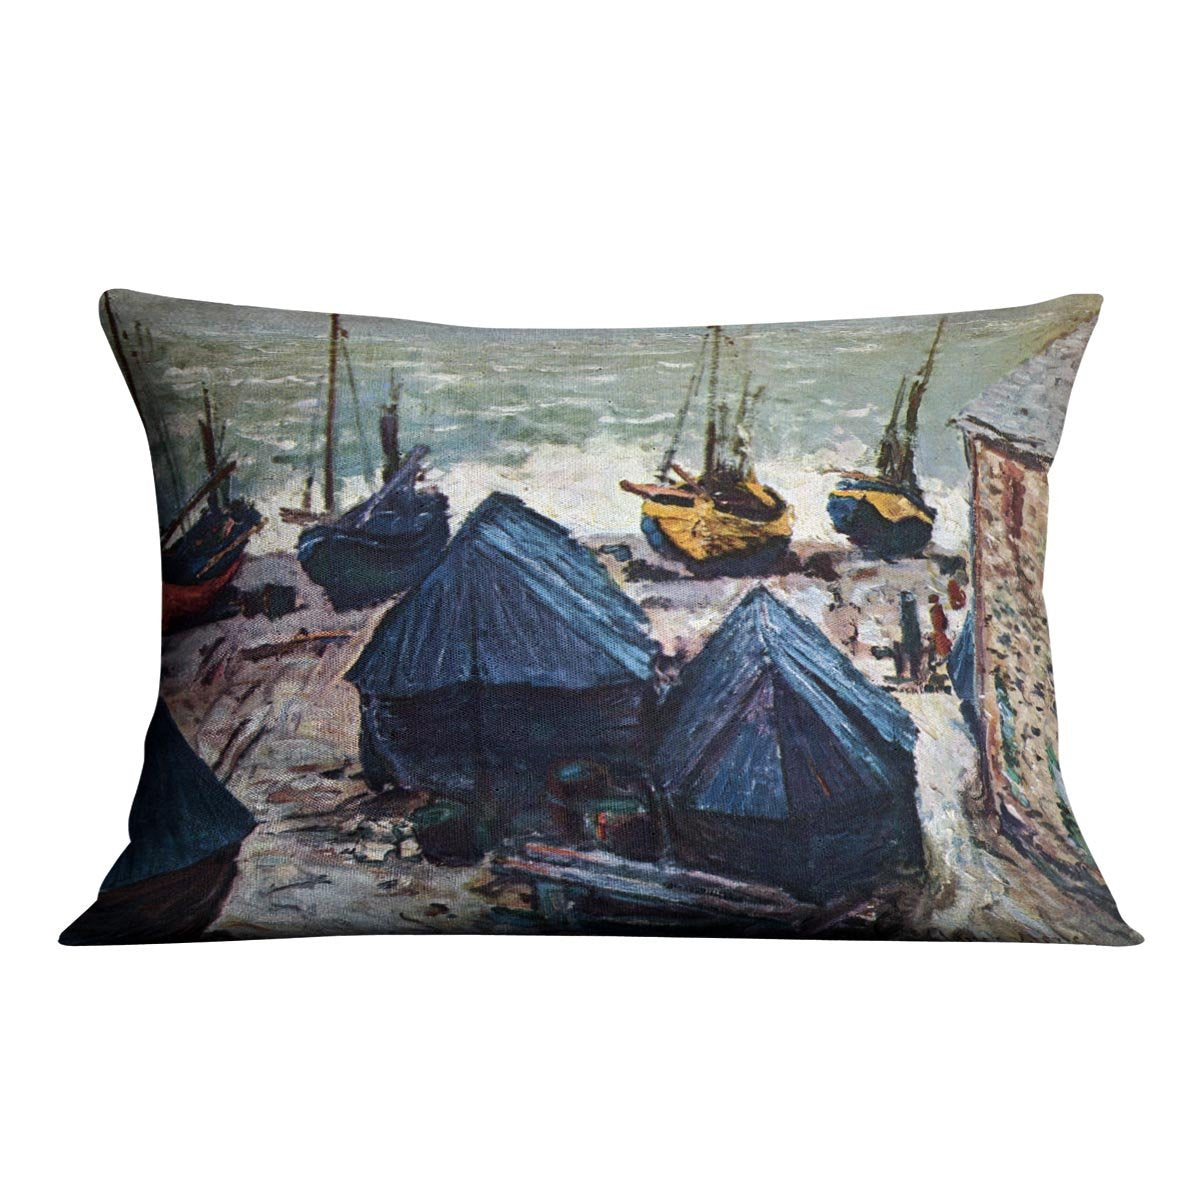 The Boats by Monet Throw Pillow